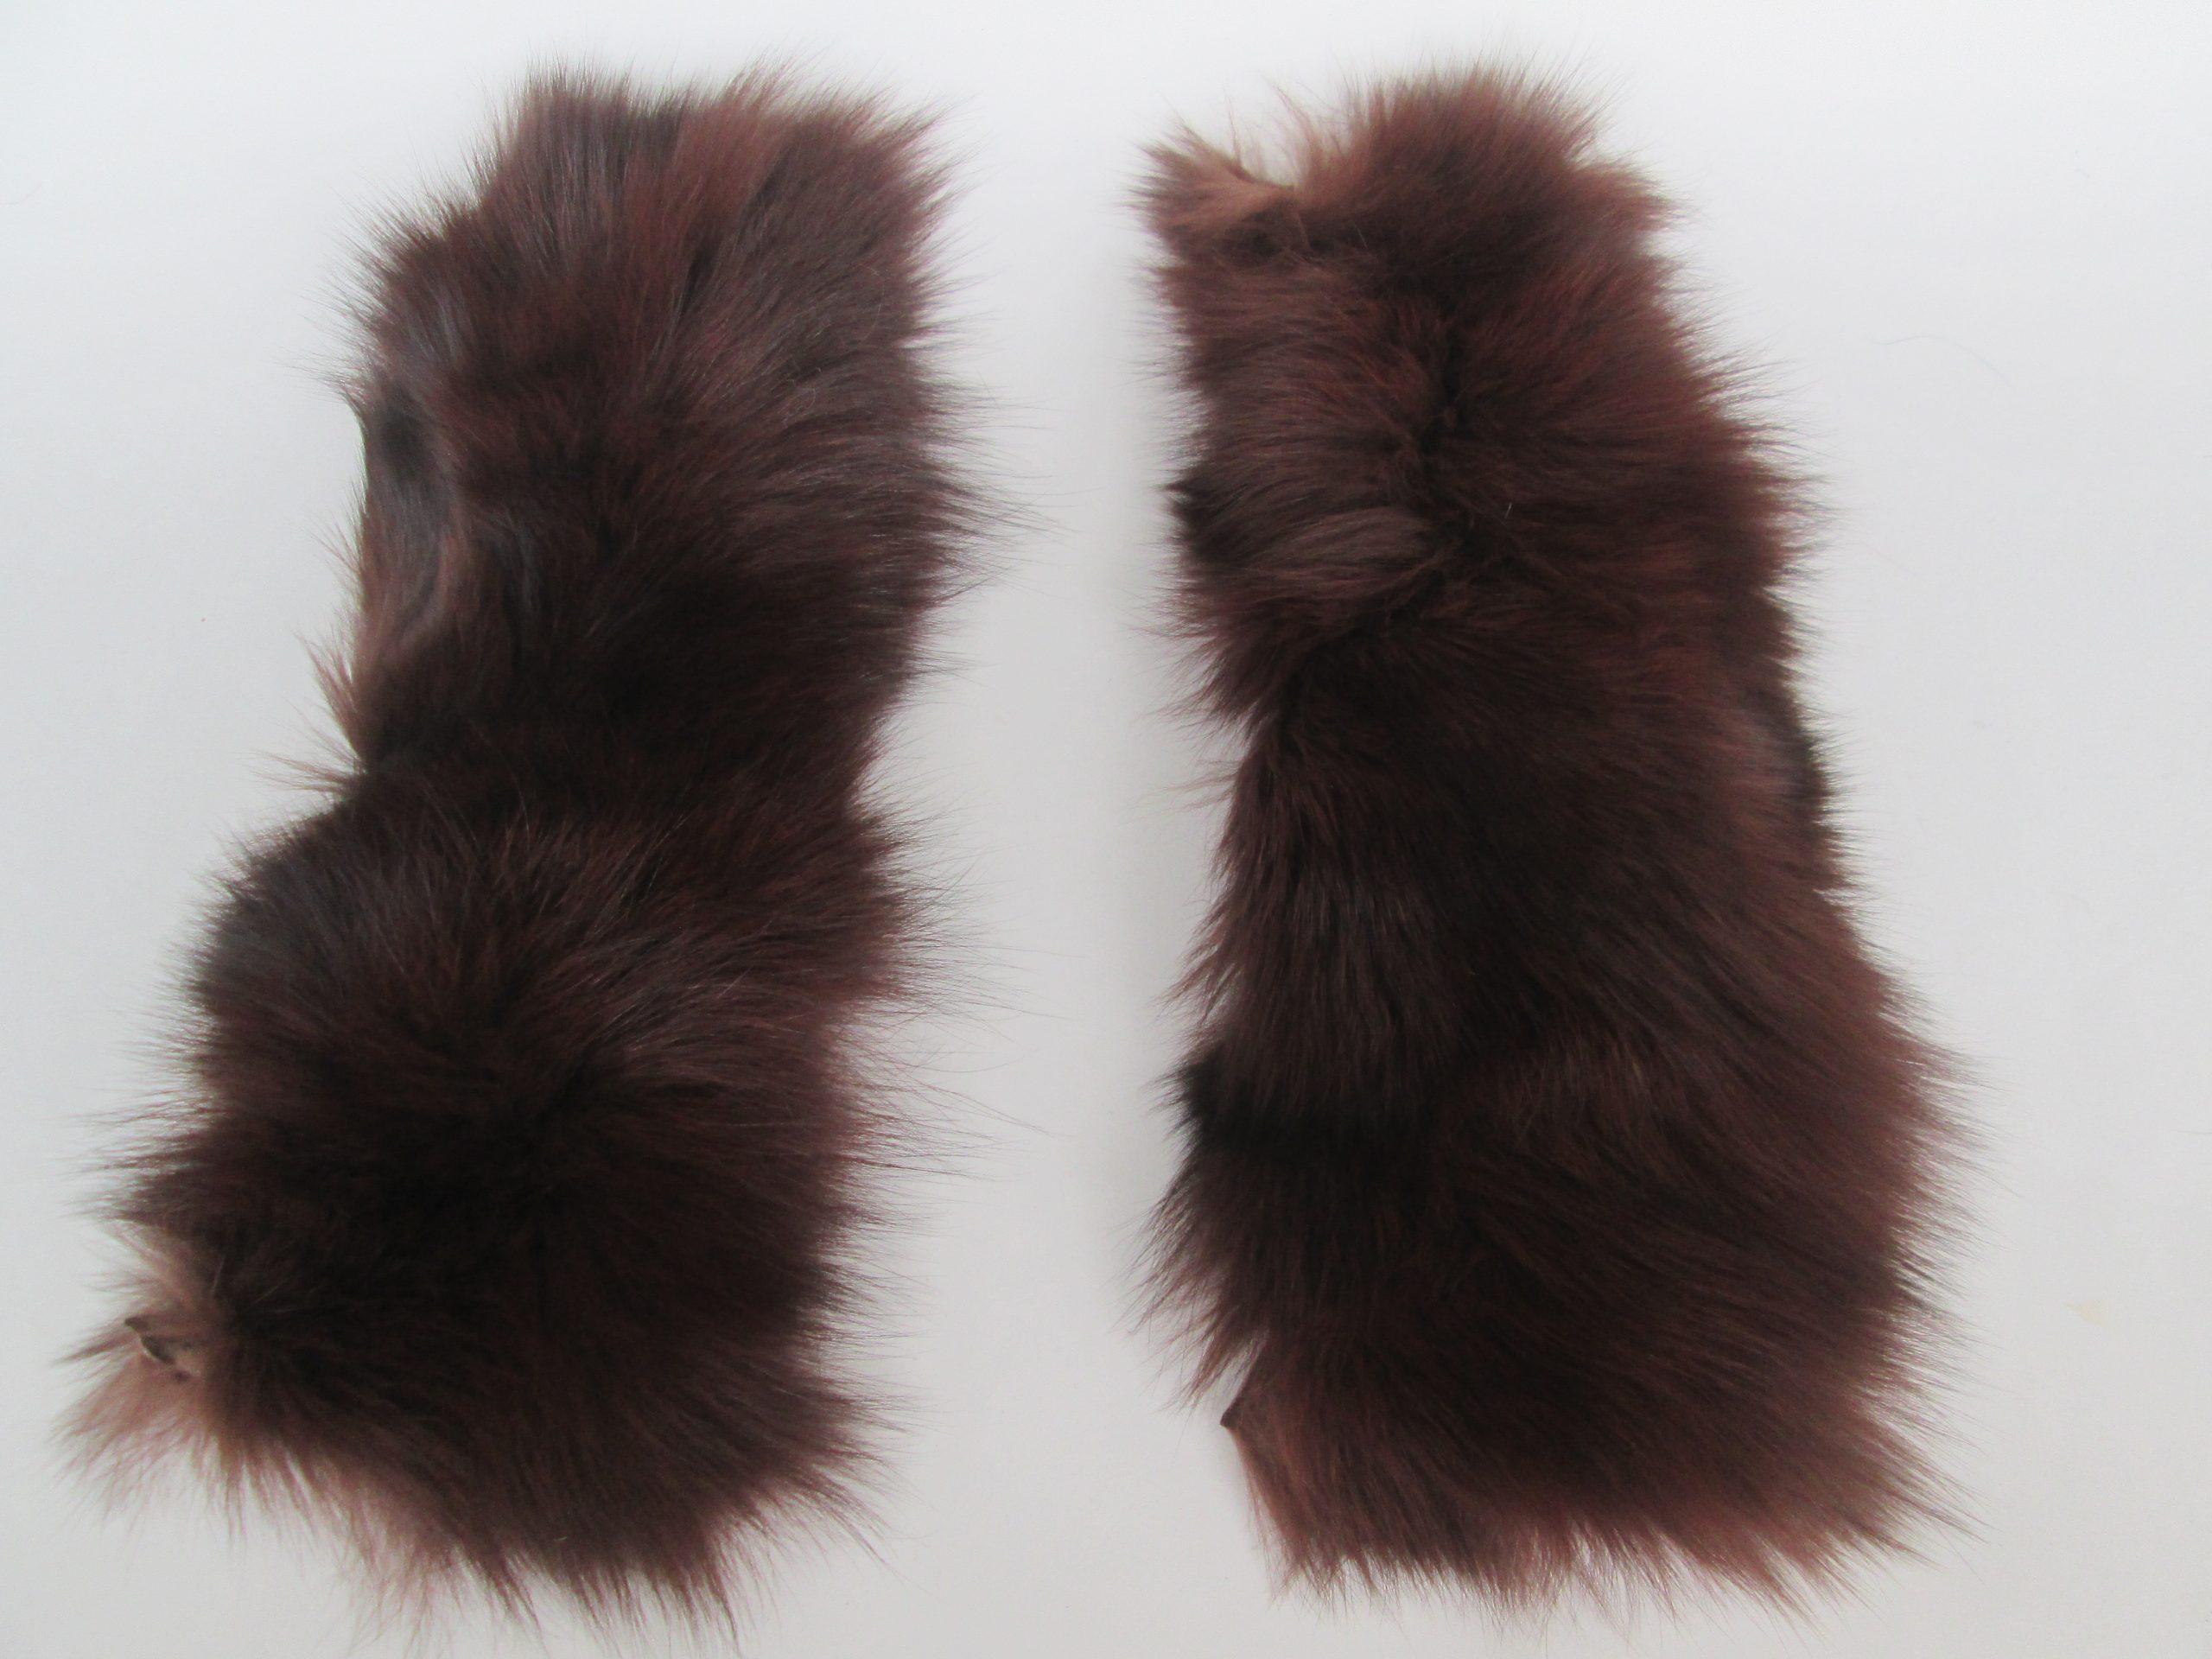 Pair of Real Brown Fox Pieces - Perfect to attach for cuffs | Fur ...